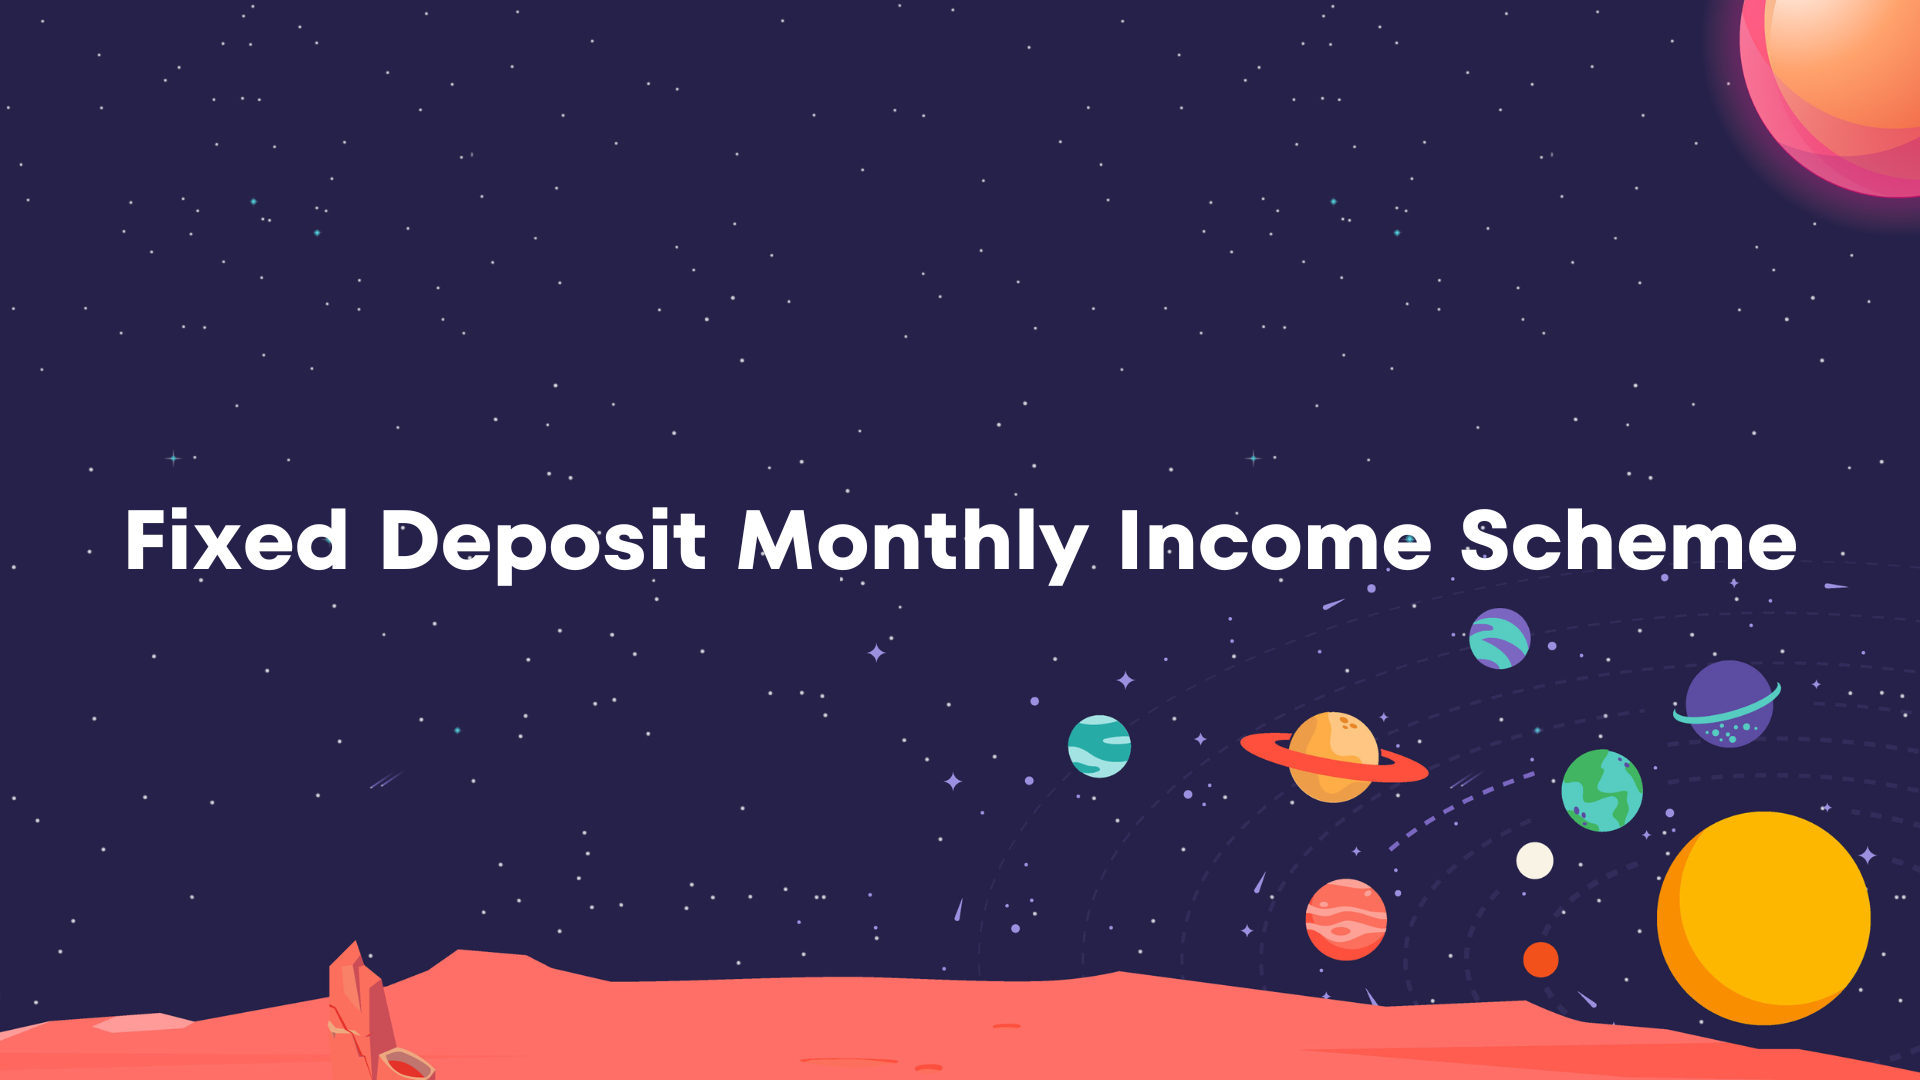 Fixed Deposit Monthly Income Scheme